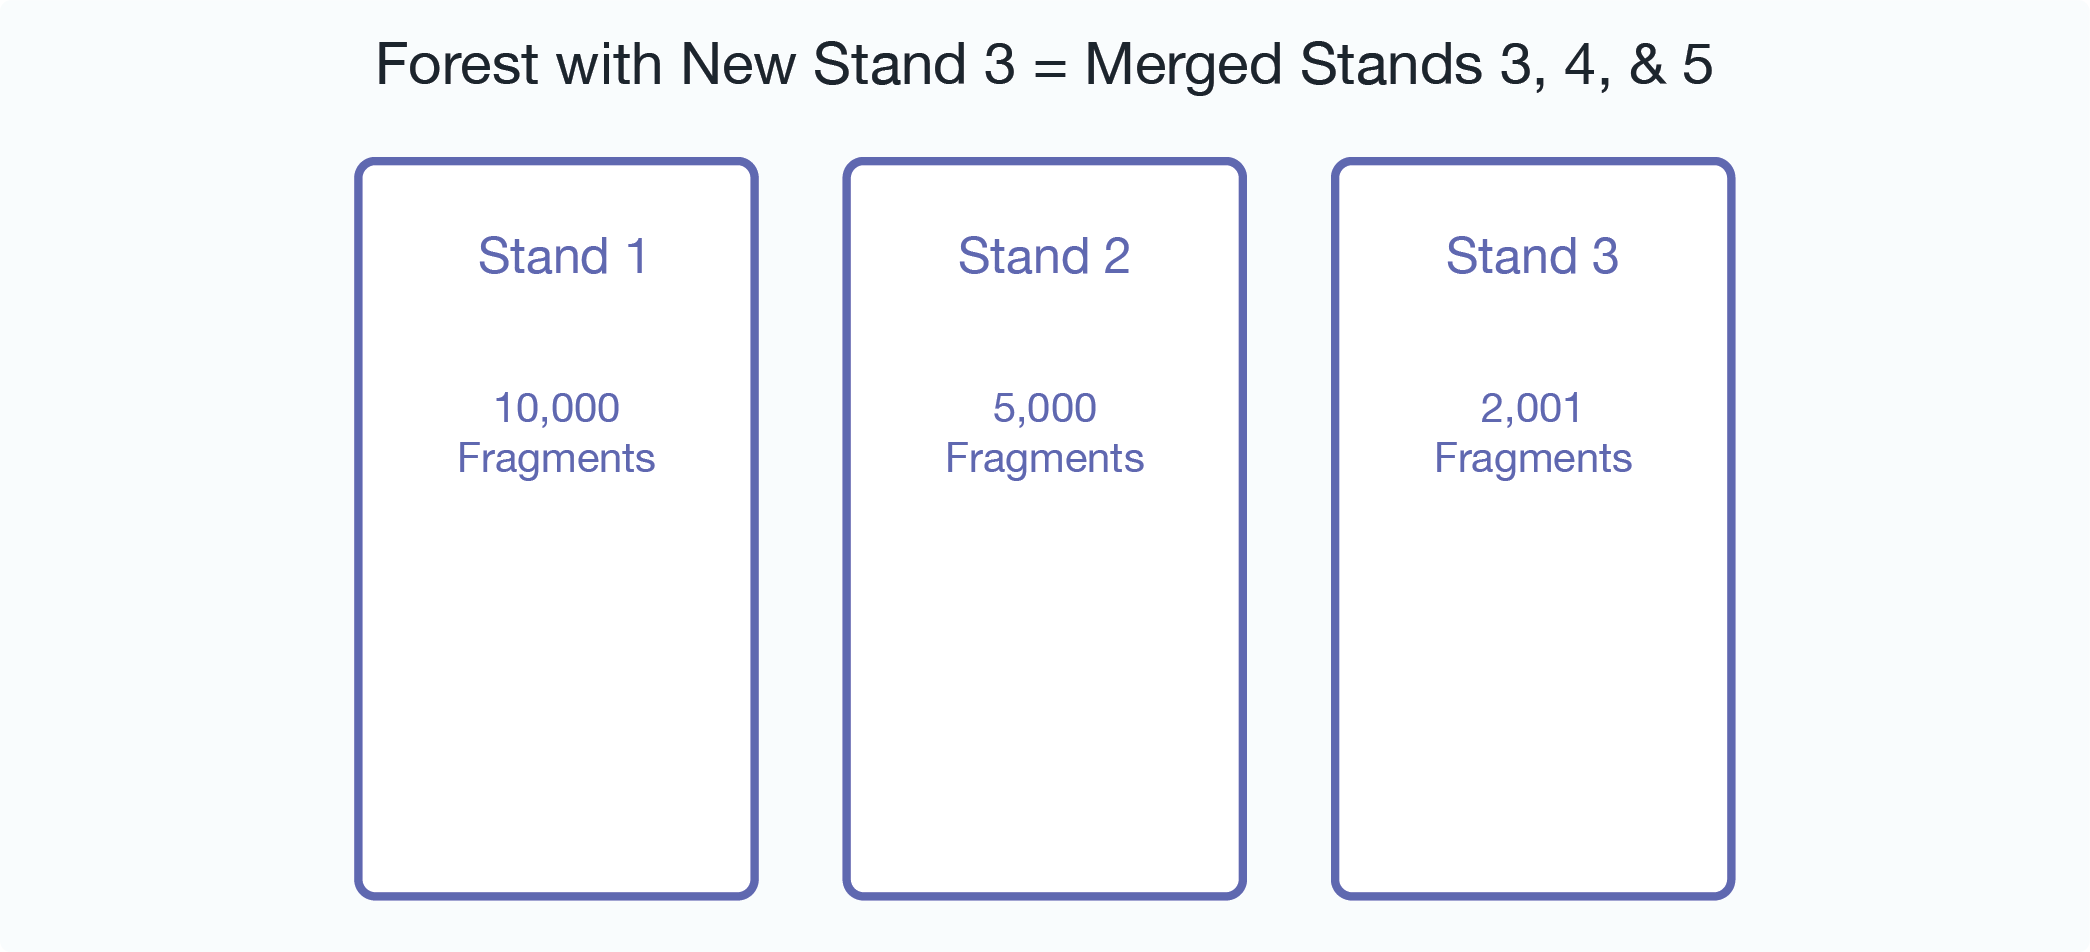 Graphic showing forest with new stand 3 = merged stands 3, 4, & 5